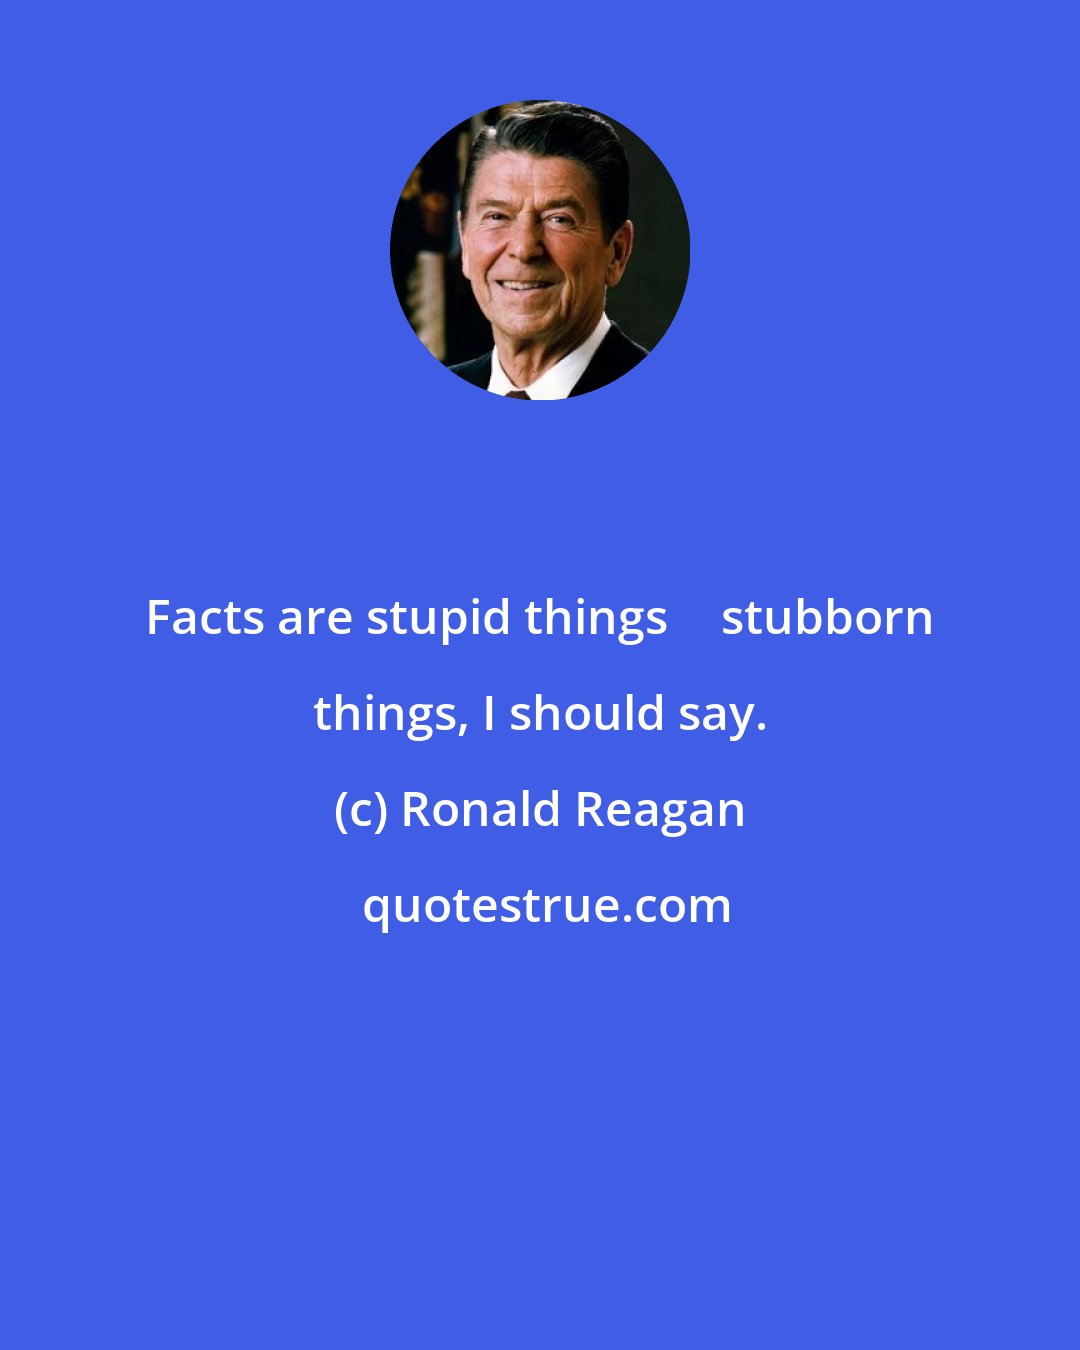 Ronald Reagan: Facts are stupid things  stubborn things, I should say.